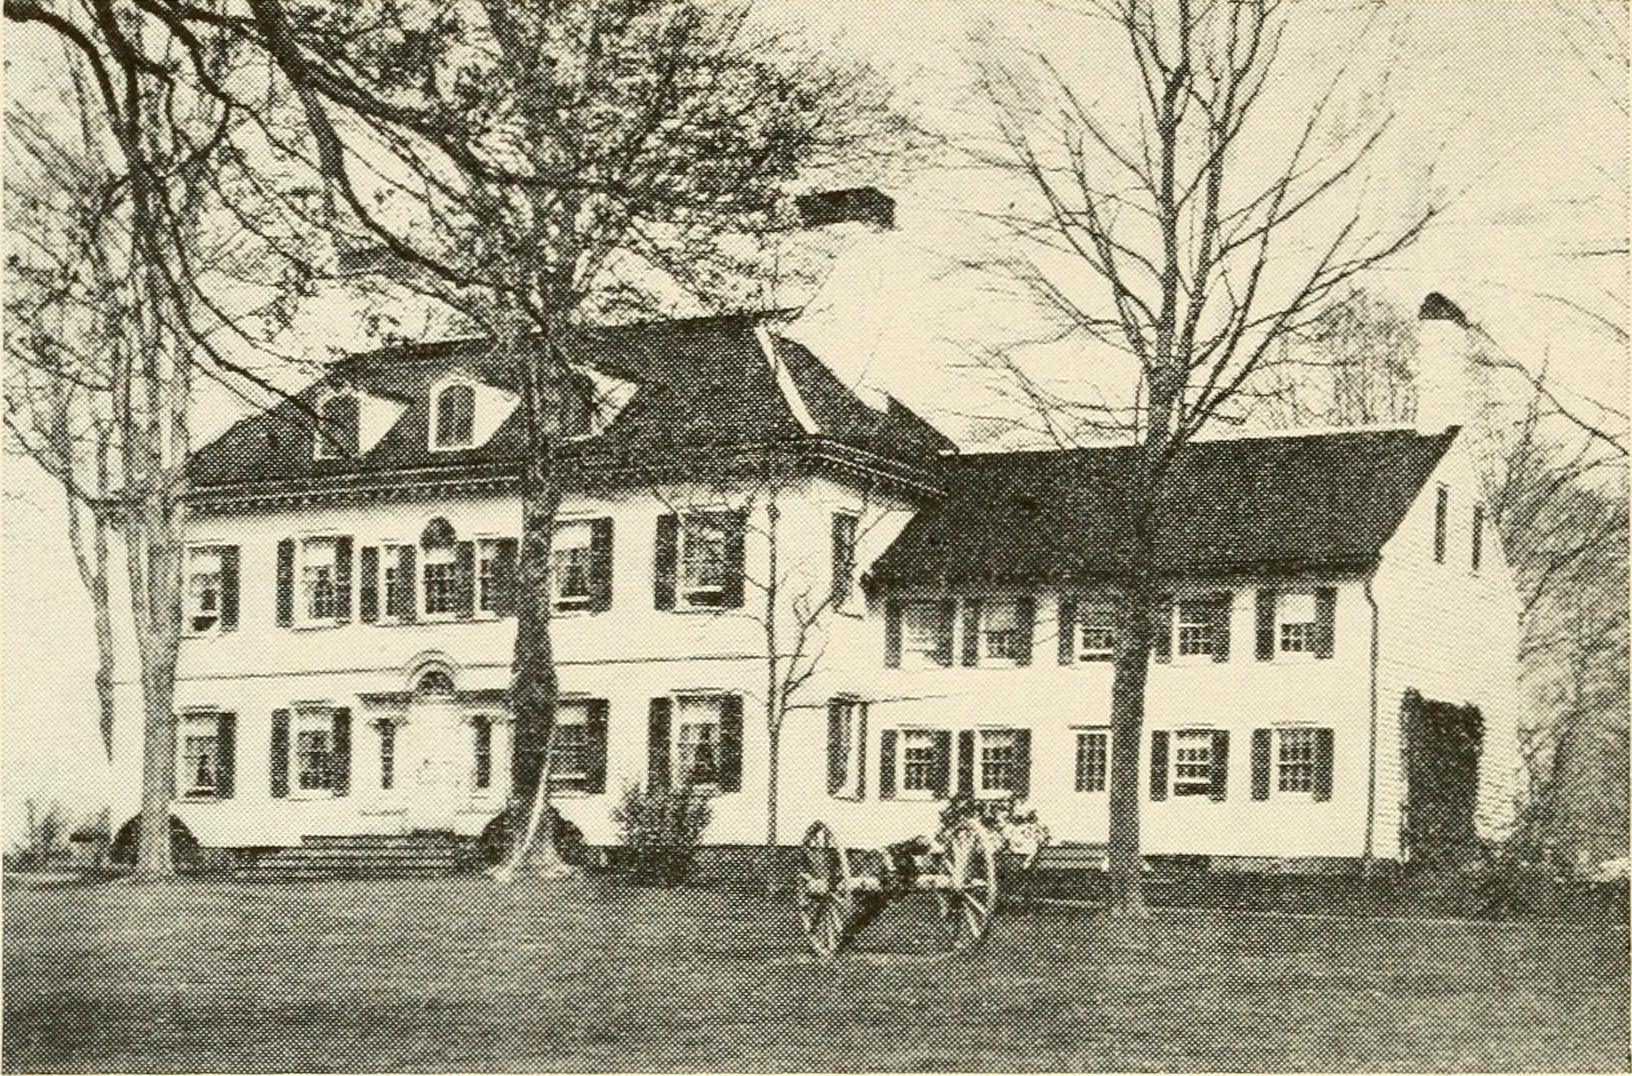 Image from page 11 of "Landmarks of historic interest along the Lackawanna railroad : wherein will be found divers descriptions and some photographs of houses and lands which figured in stirring events before, during and after the War of Revolution" (1900